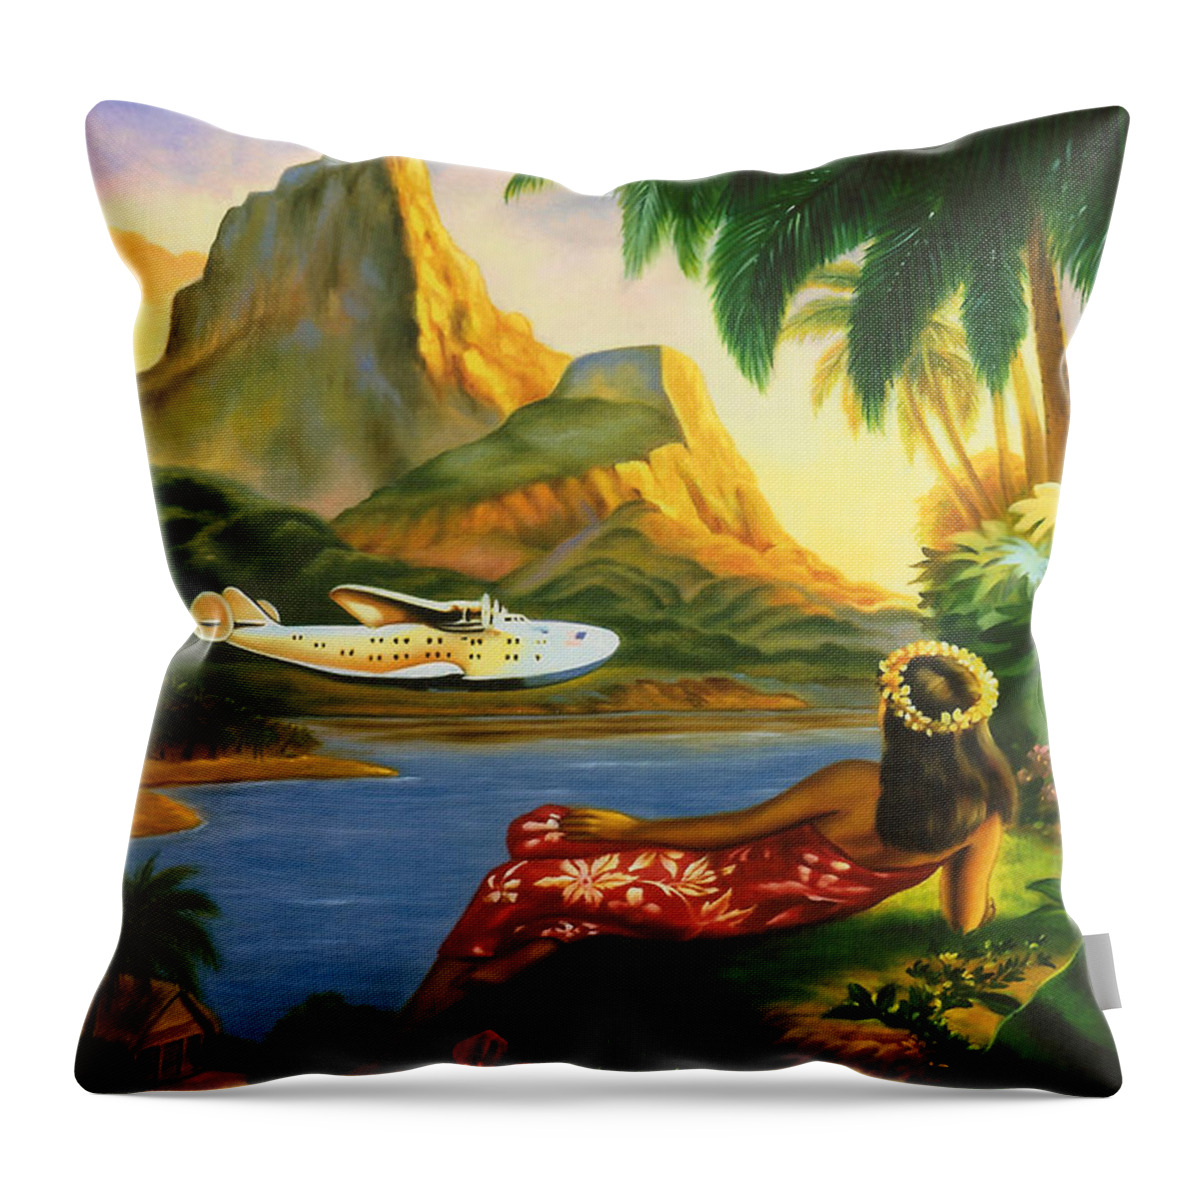 Background Throw Pillow featuring the digital art South Sea Isles by Georgia Clare